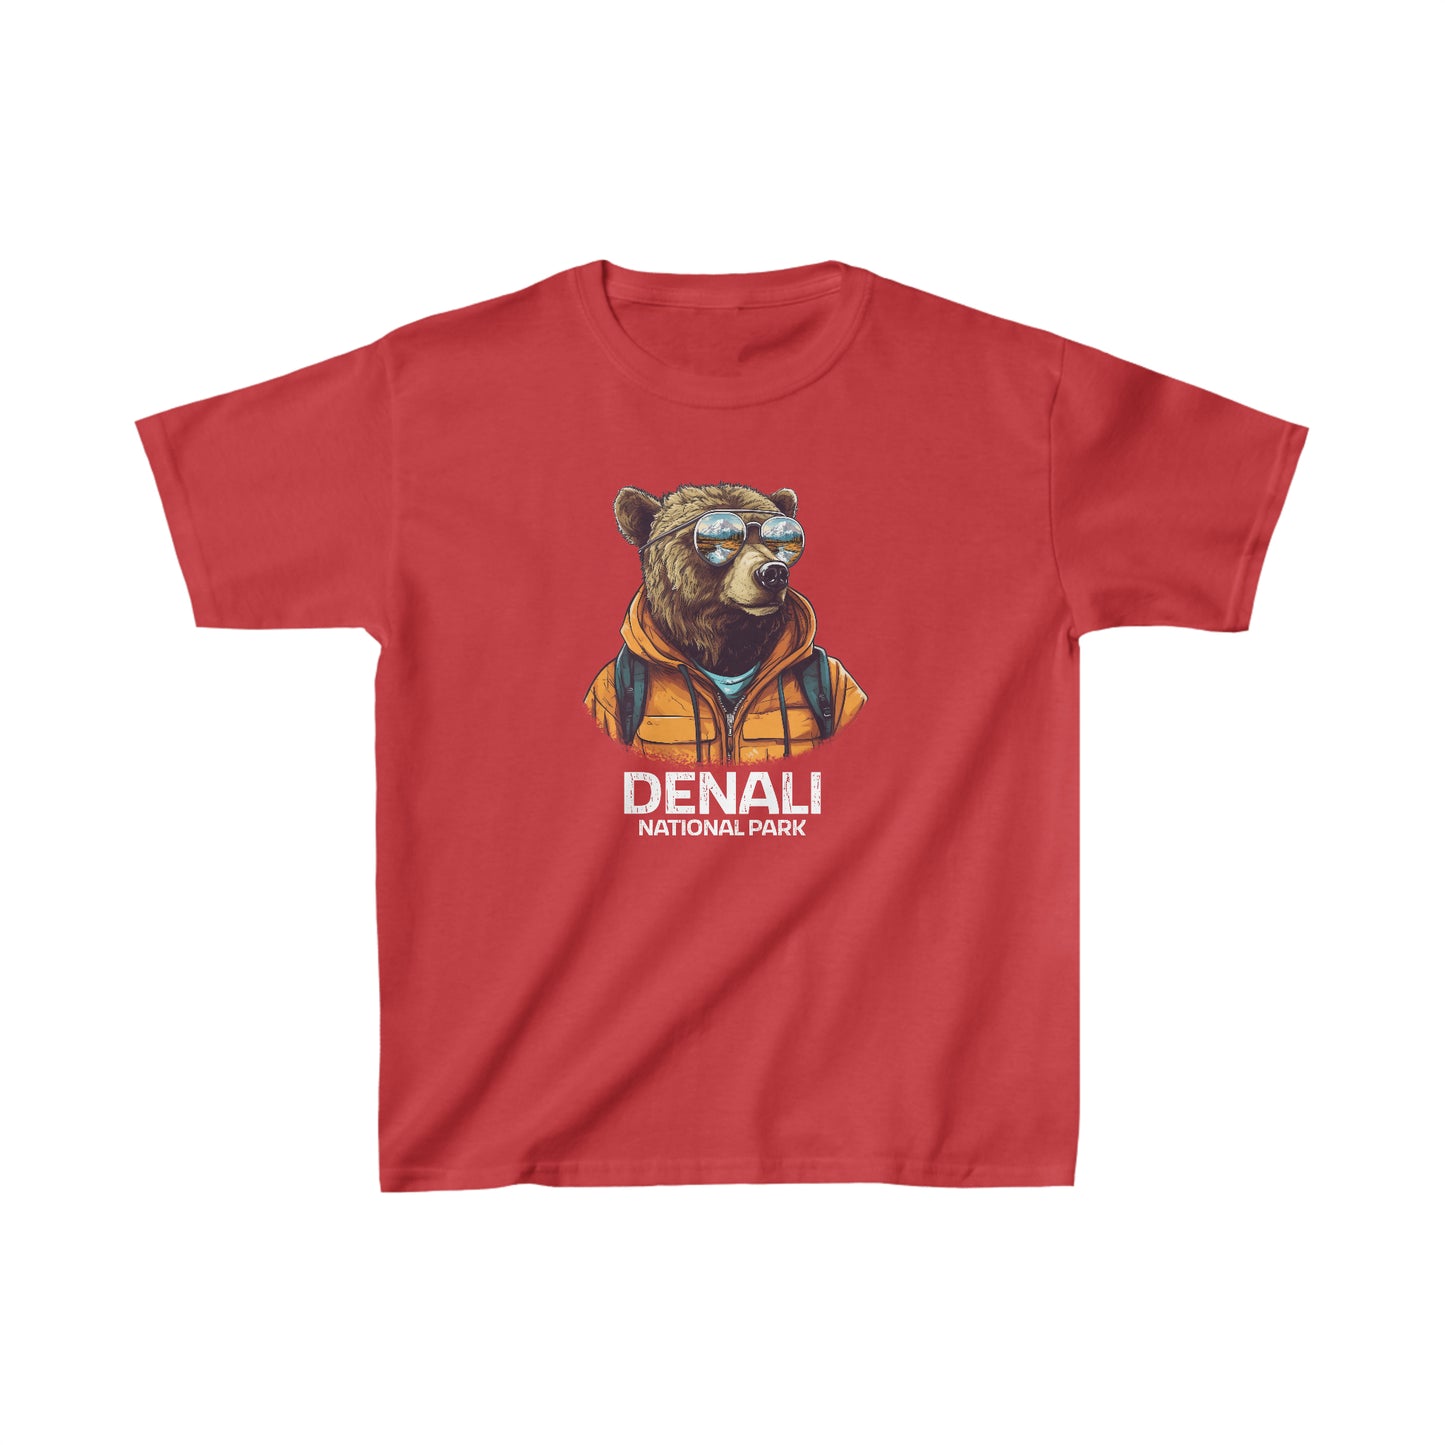 Denali National Park Child T-Shirt - Cool Grizzly Bear